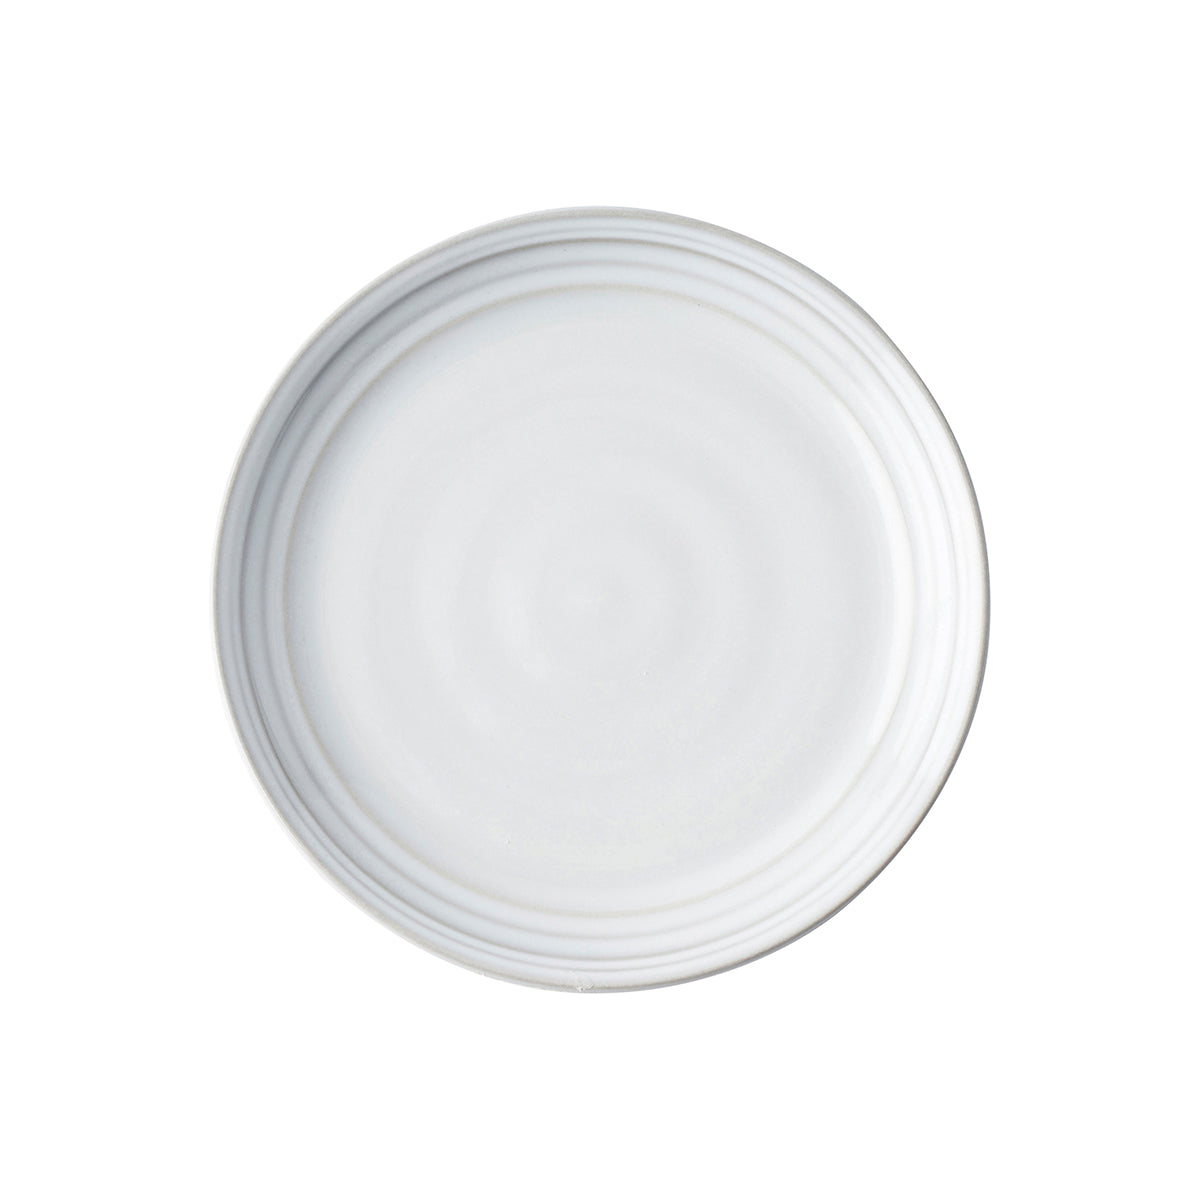 From our Bilbao Collection- Set atop this eminently useful plate appetizers, tapas, side dishes or even place cards for a supremely layered table.